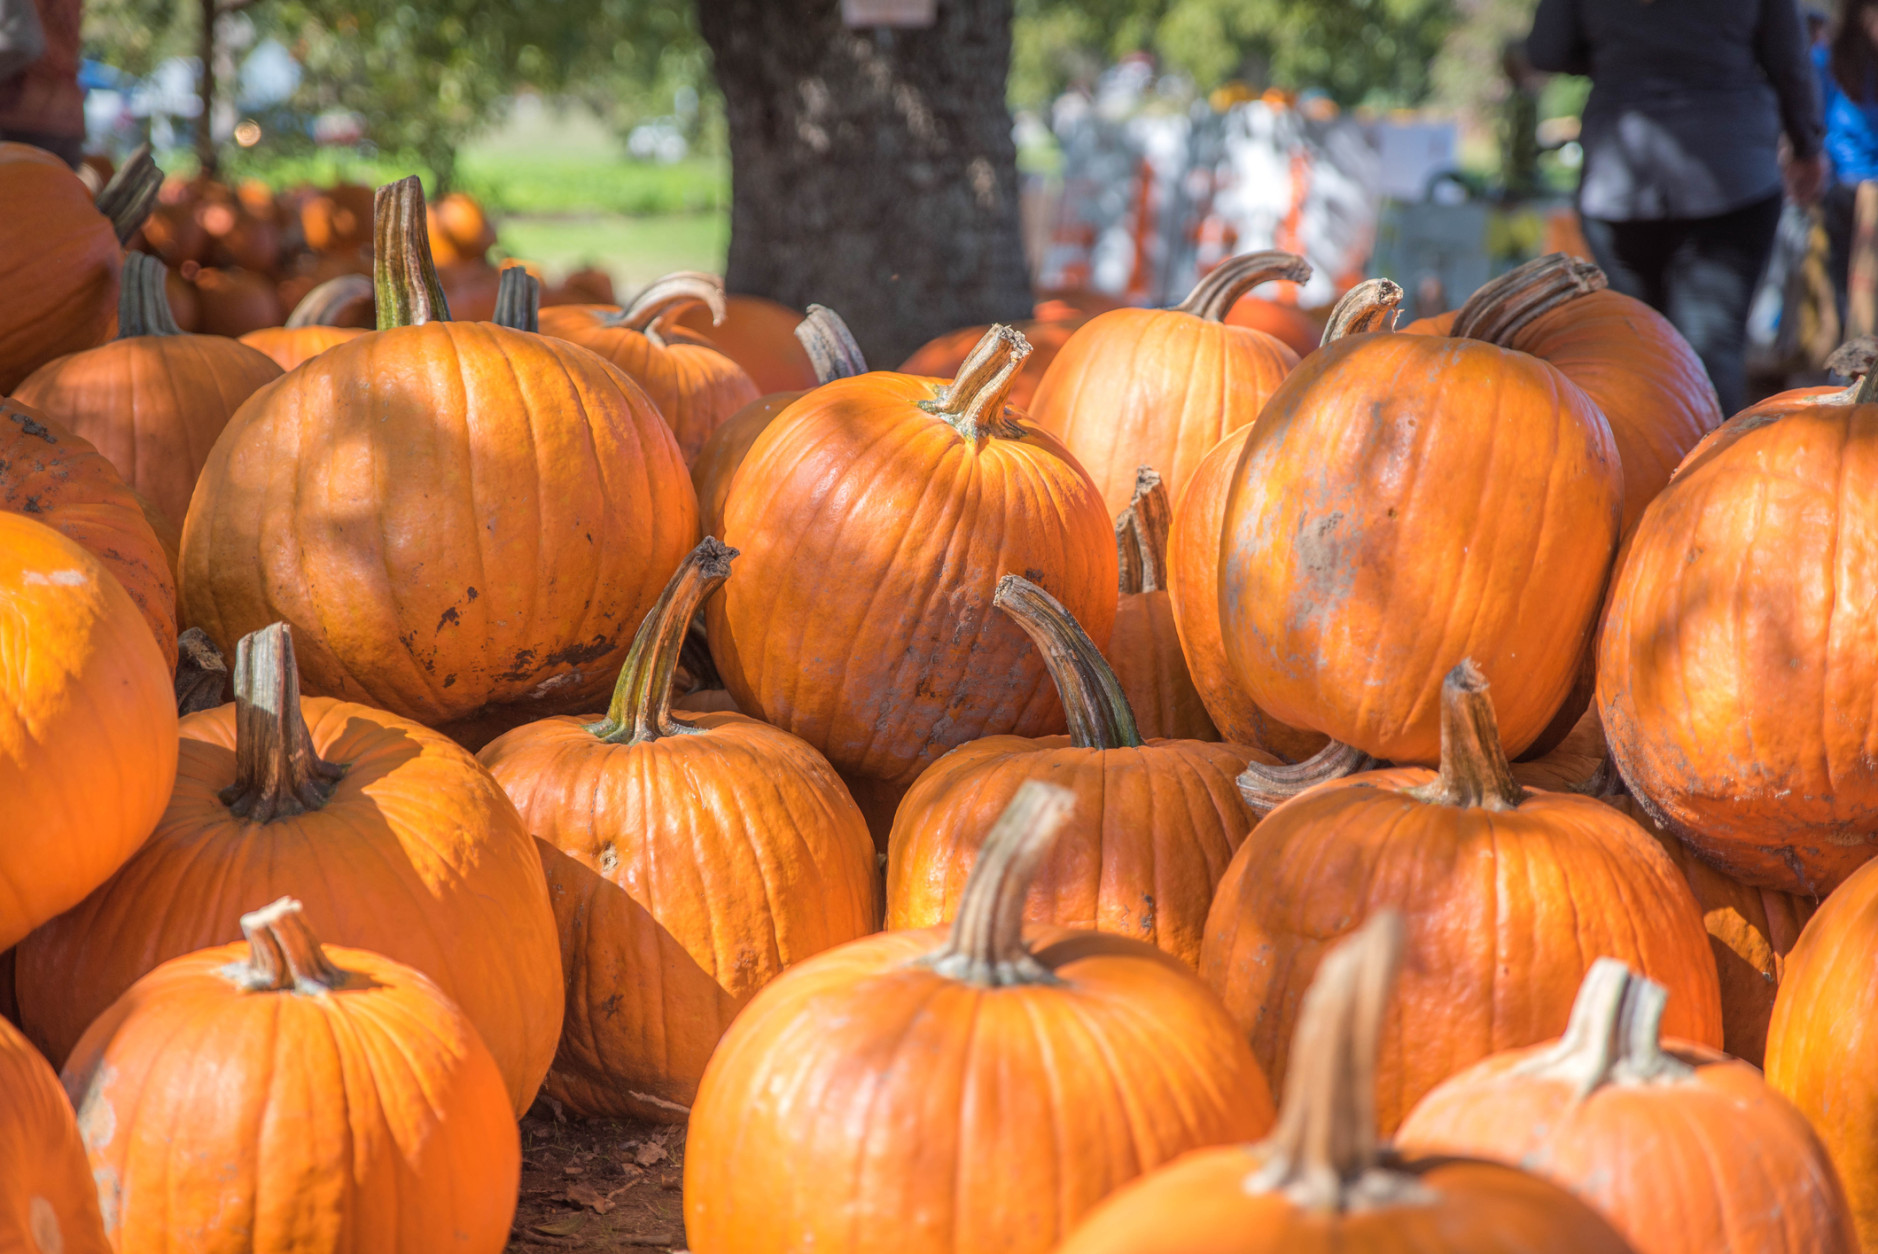 <p>The pumpkin season at <a href="http://www.yankeyfarms.com/pumpkin_patch.htm" target="_blank" rel="noopener">Yankey Farms</a> in Prince William County, Virginia, begins the last weekend in September. They offer a &#8220;pick your own&#8221; pumpkin patch but will not have hayrides this year.</p>
<p>However, they are offering a corn maze and small farm animal exhibit that is free for those picking pumpkins. They also have apples, honey, corn shocks, straw bales, gourds and more.</p>
